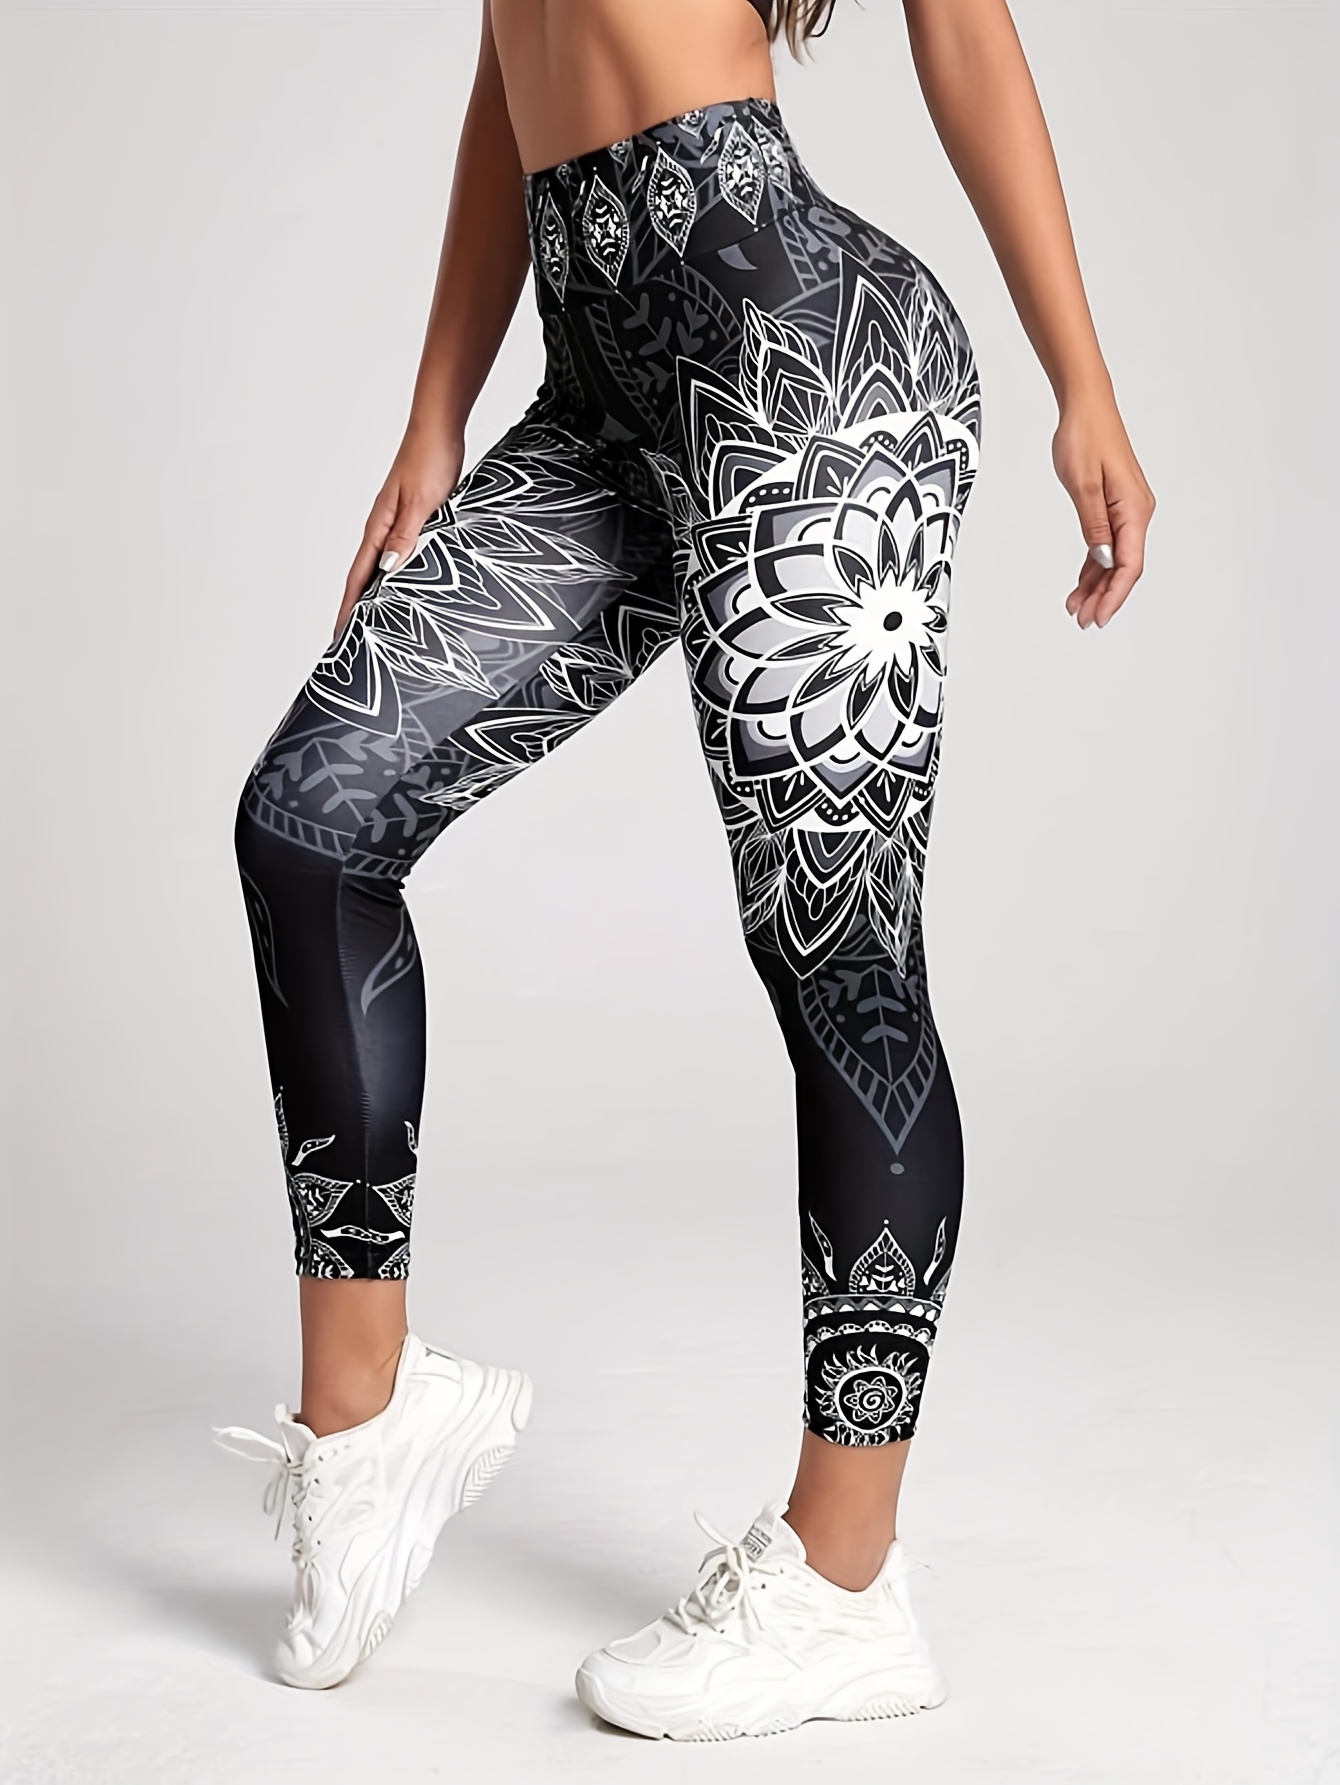 Floral Print Casual Yoga Pants, High Stretch Slim Fit Fitness Yoga  Leggings, Women's Activewear